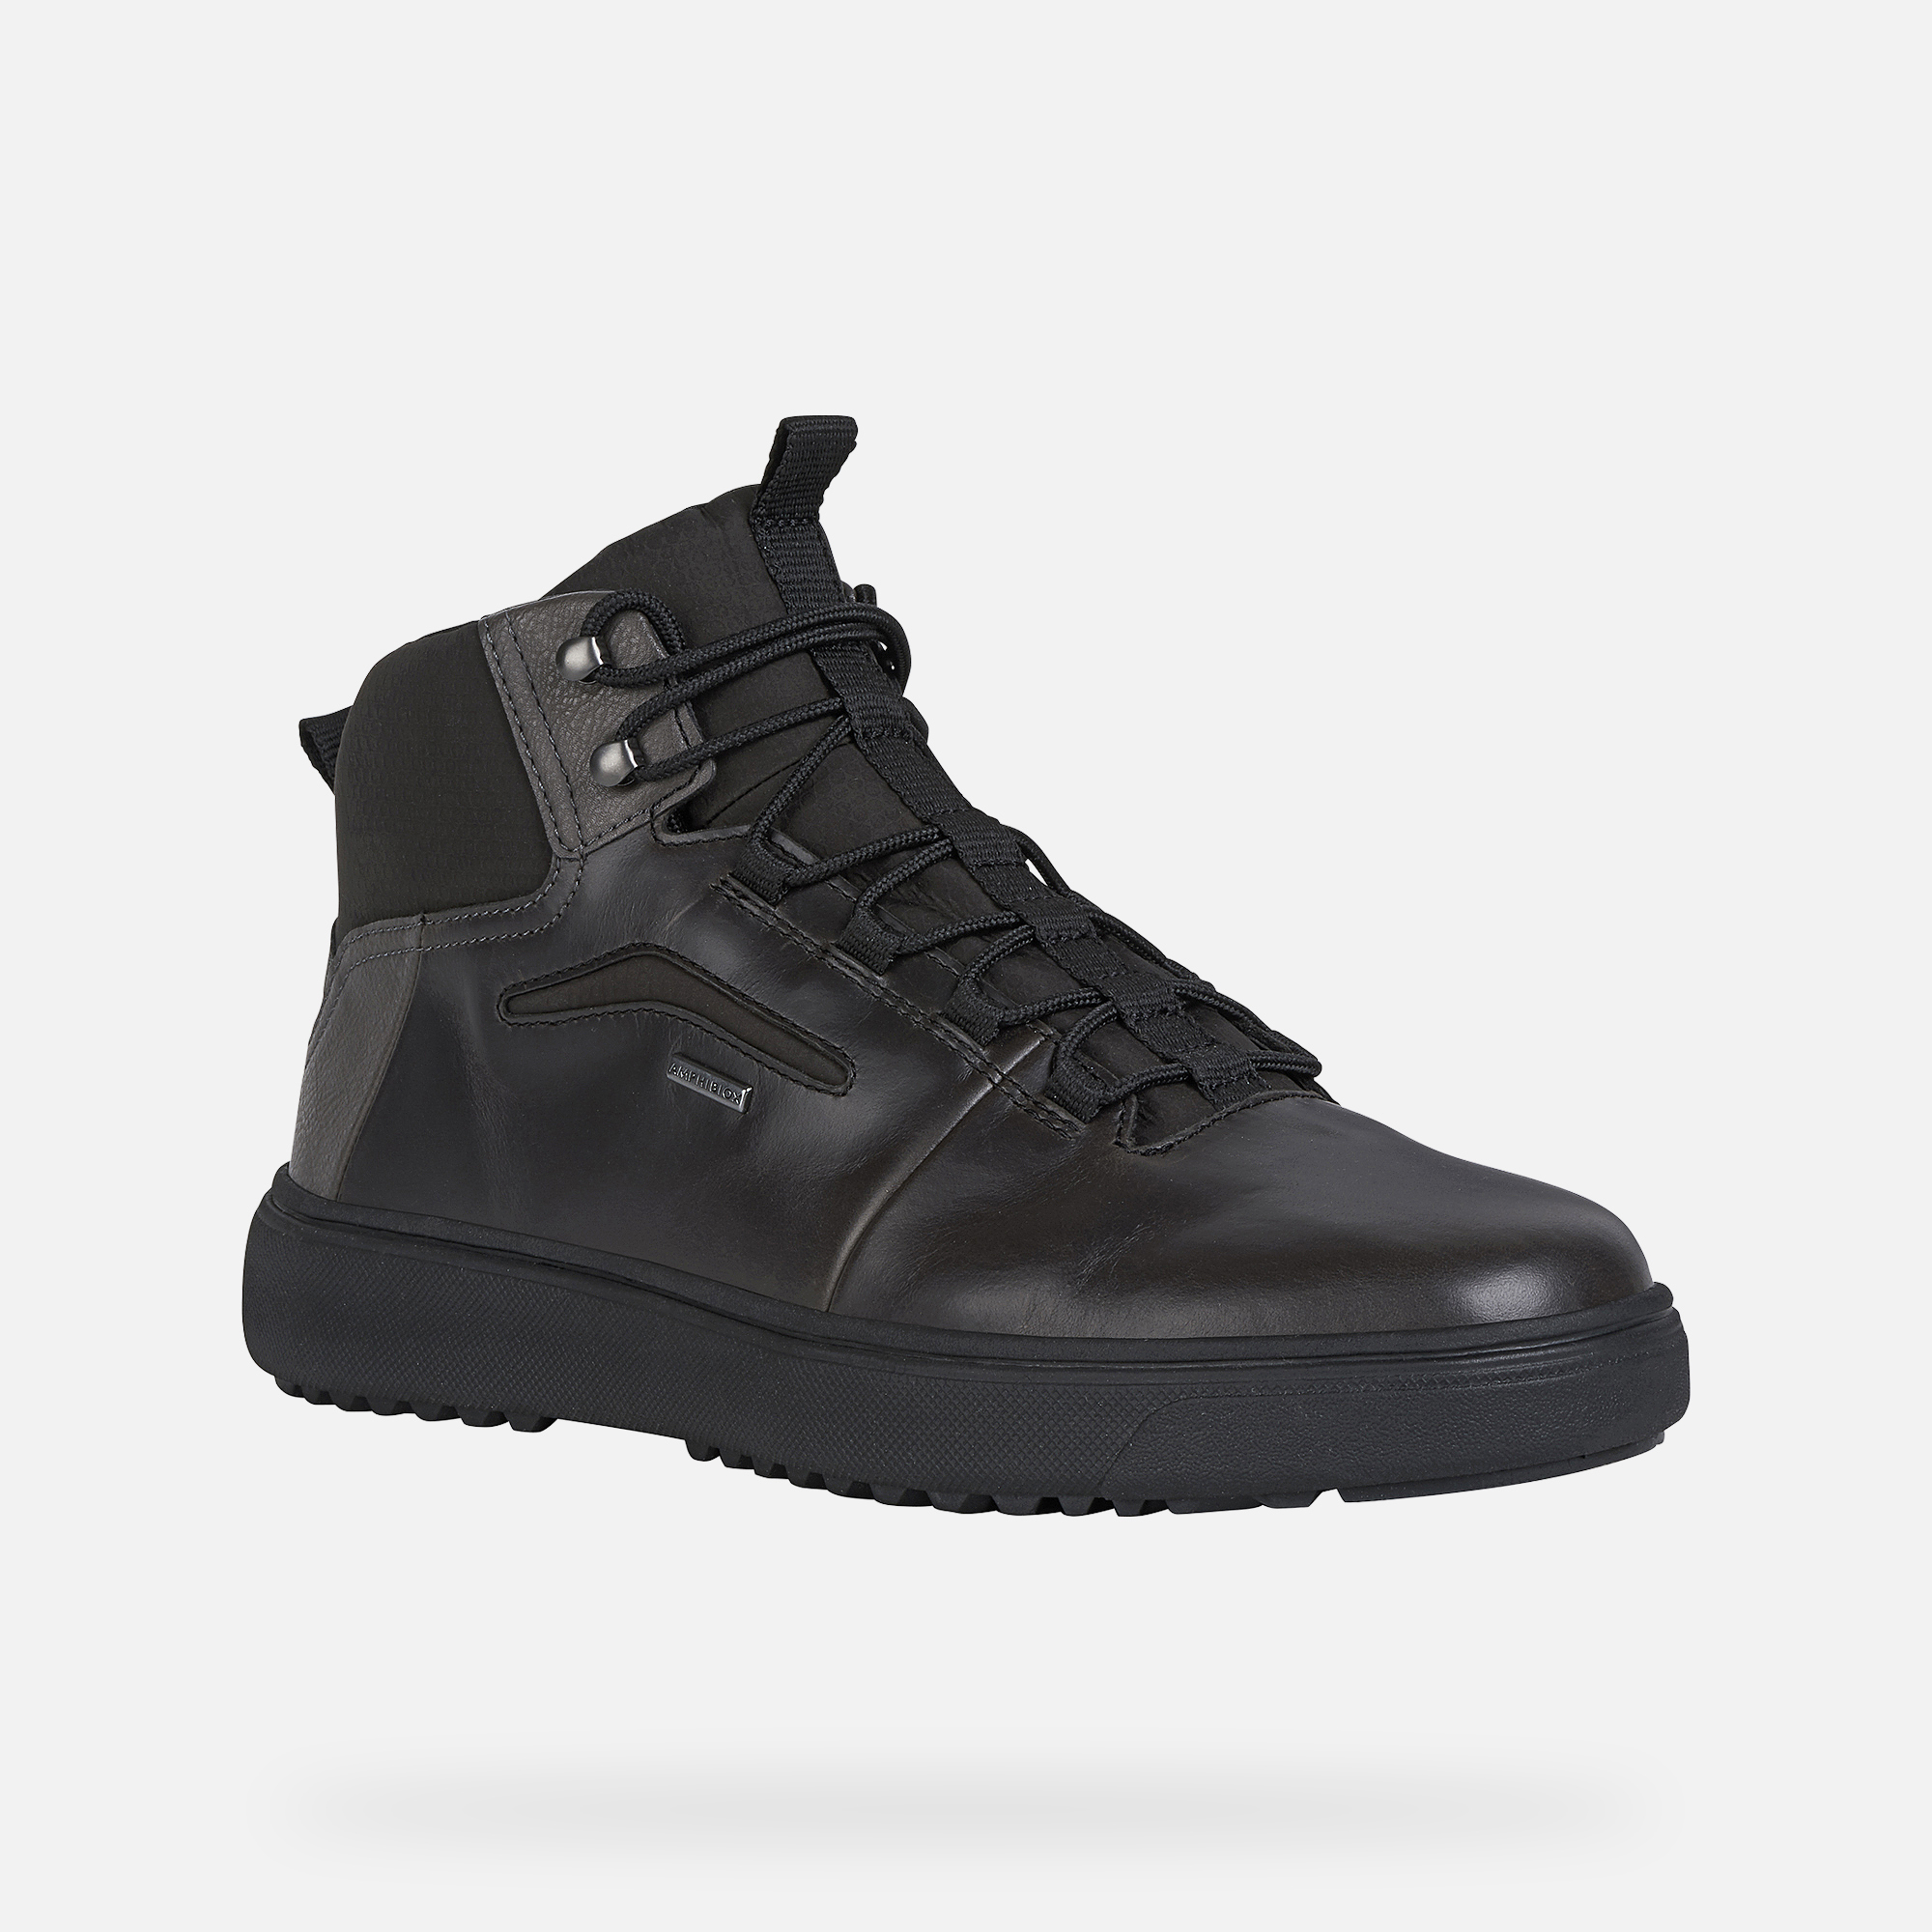 CERVINO ABX MAN - BOOTS from men | Geox